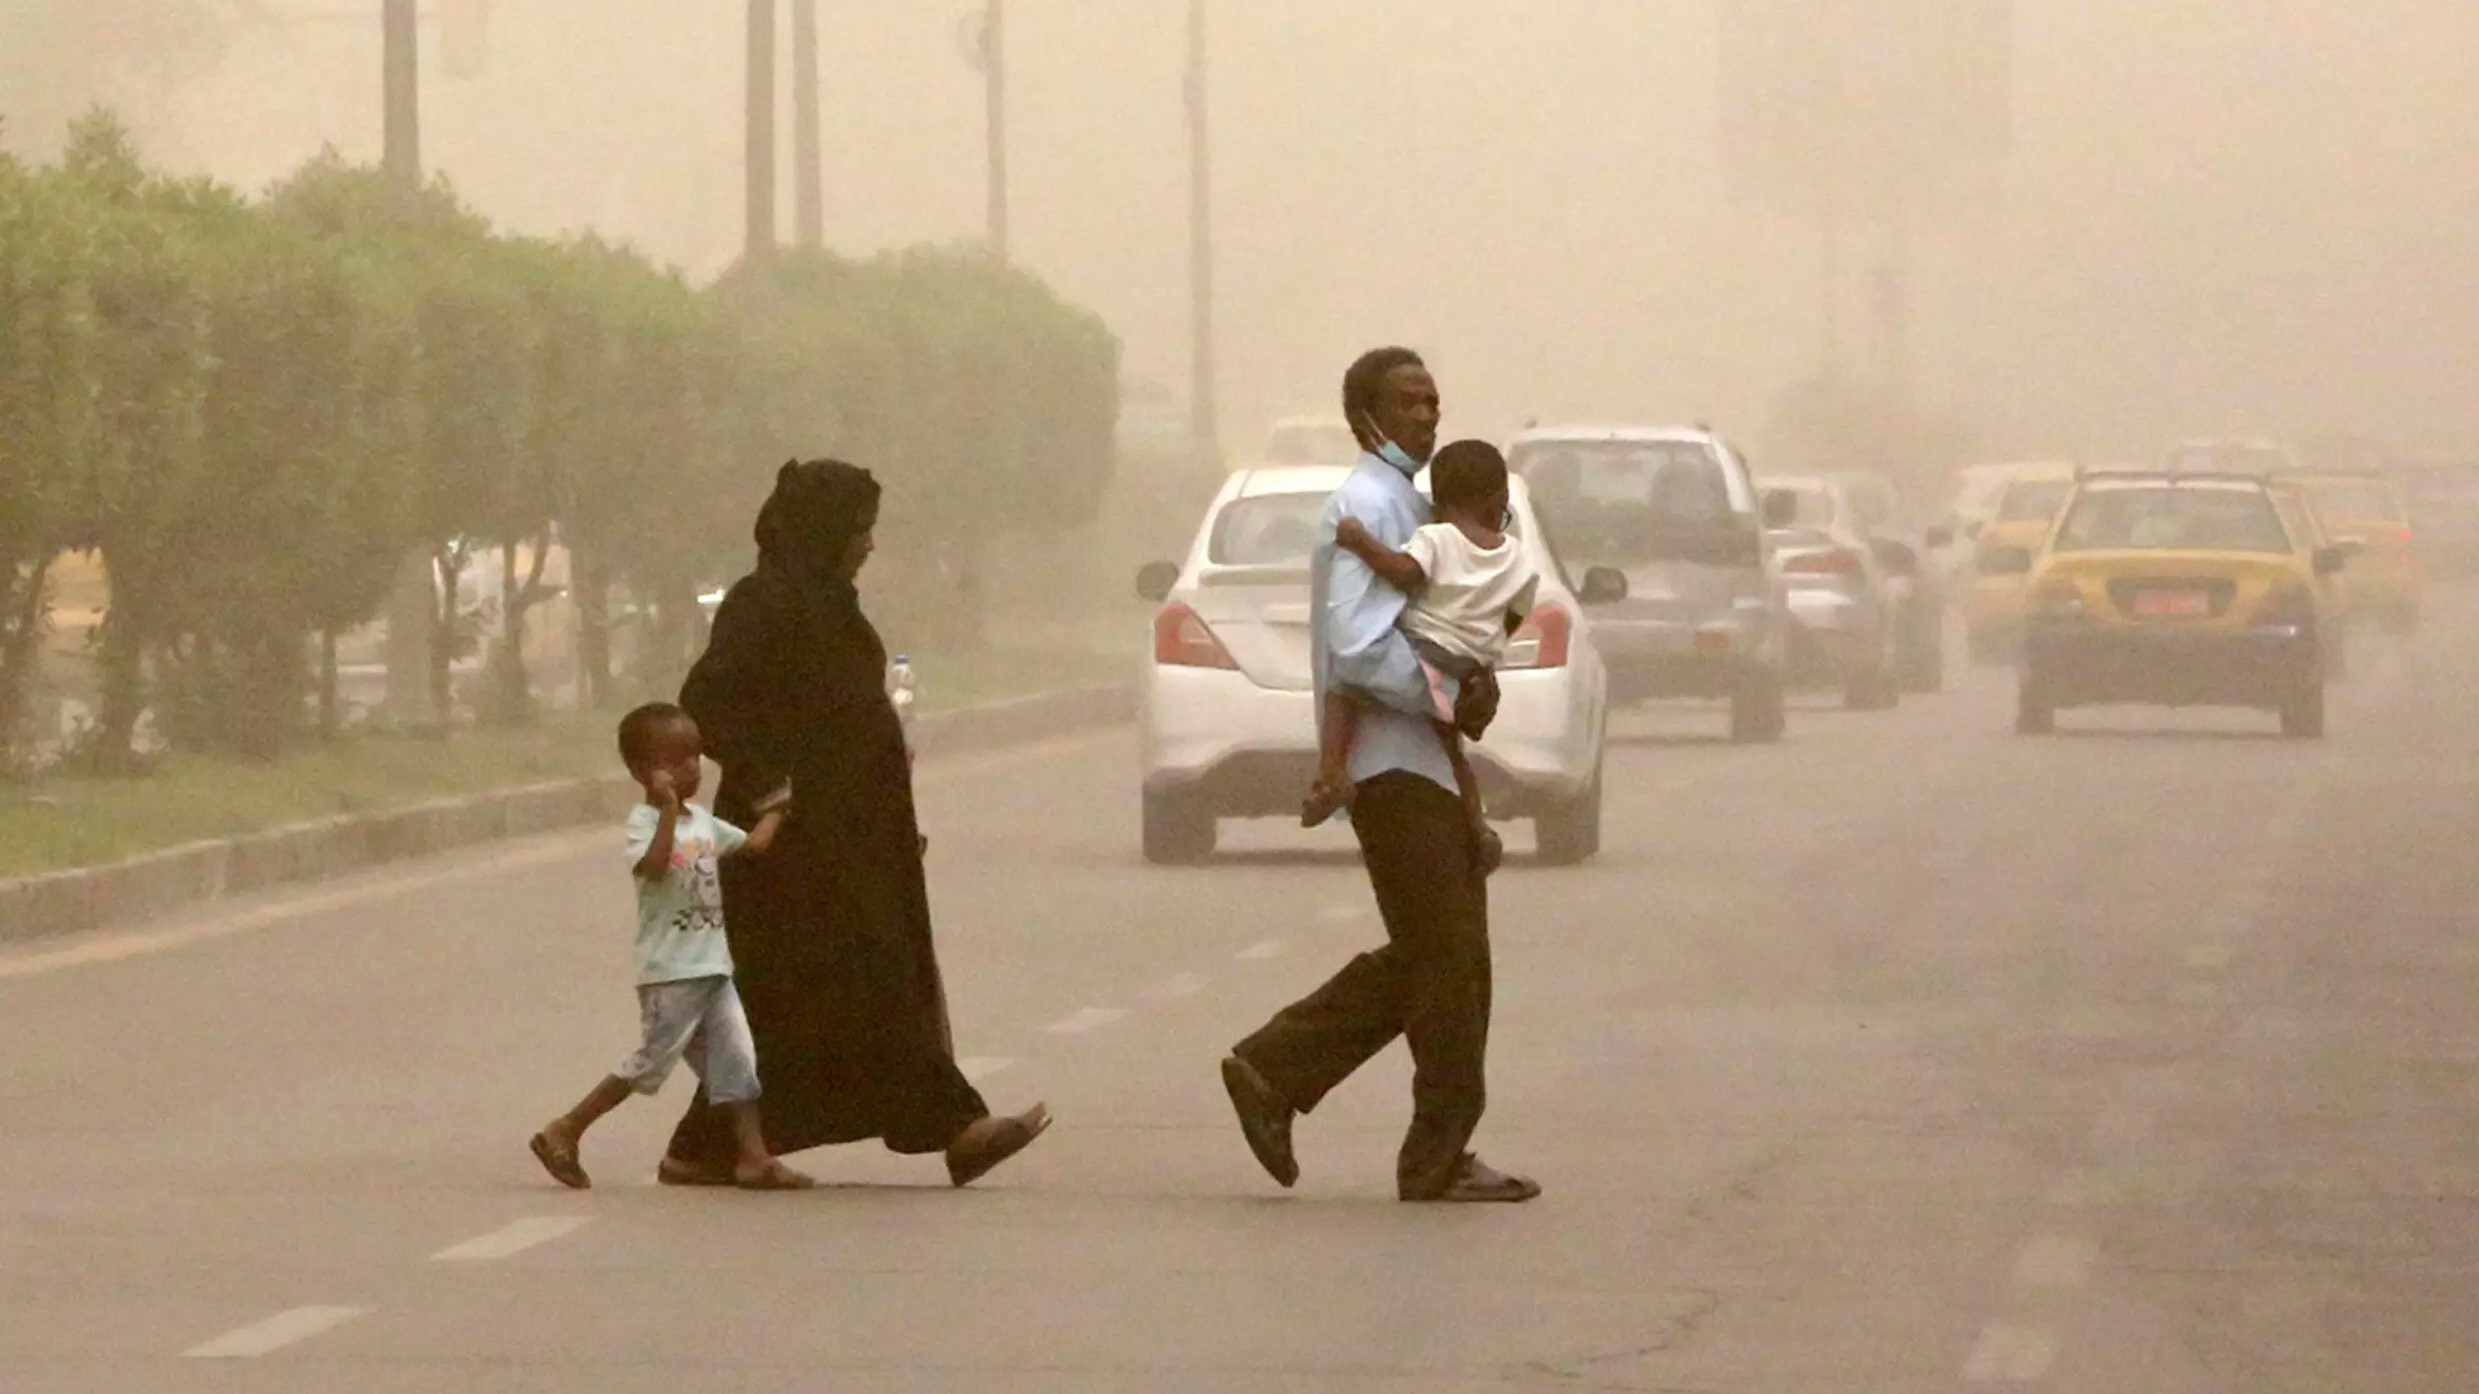 A family crosses a street during a sandstorm in the Iraqi capital Baghdad on 3 July: over the next two decades, Iraq can expect 272 dusty days per year, projected to surpass the 300-day mark by mid-century A family crosses a street during a sandstorm in the Iraqi capital Baghdad on July 3: over the next two decades, Iraq can expect 272 dusty days per year, projected to surpass the 300-day mark by mid-century (photo: Sabah ARAR/AFP)